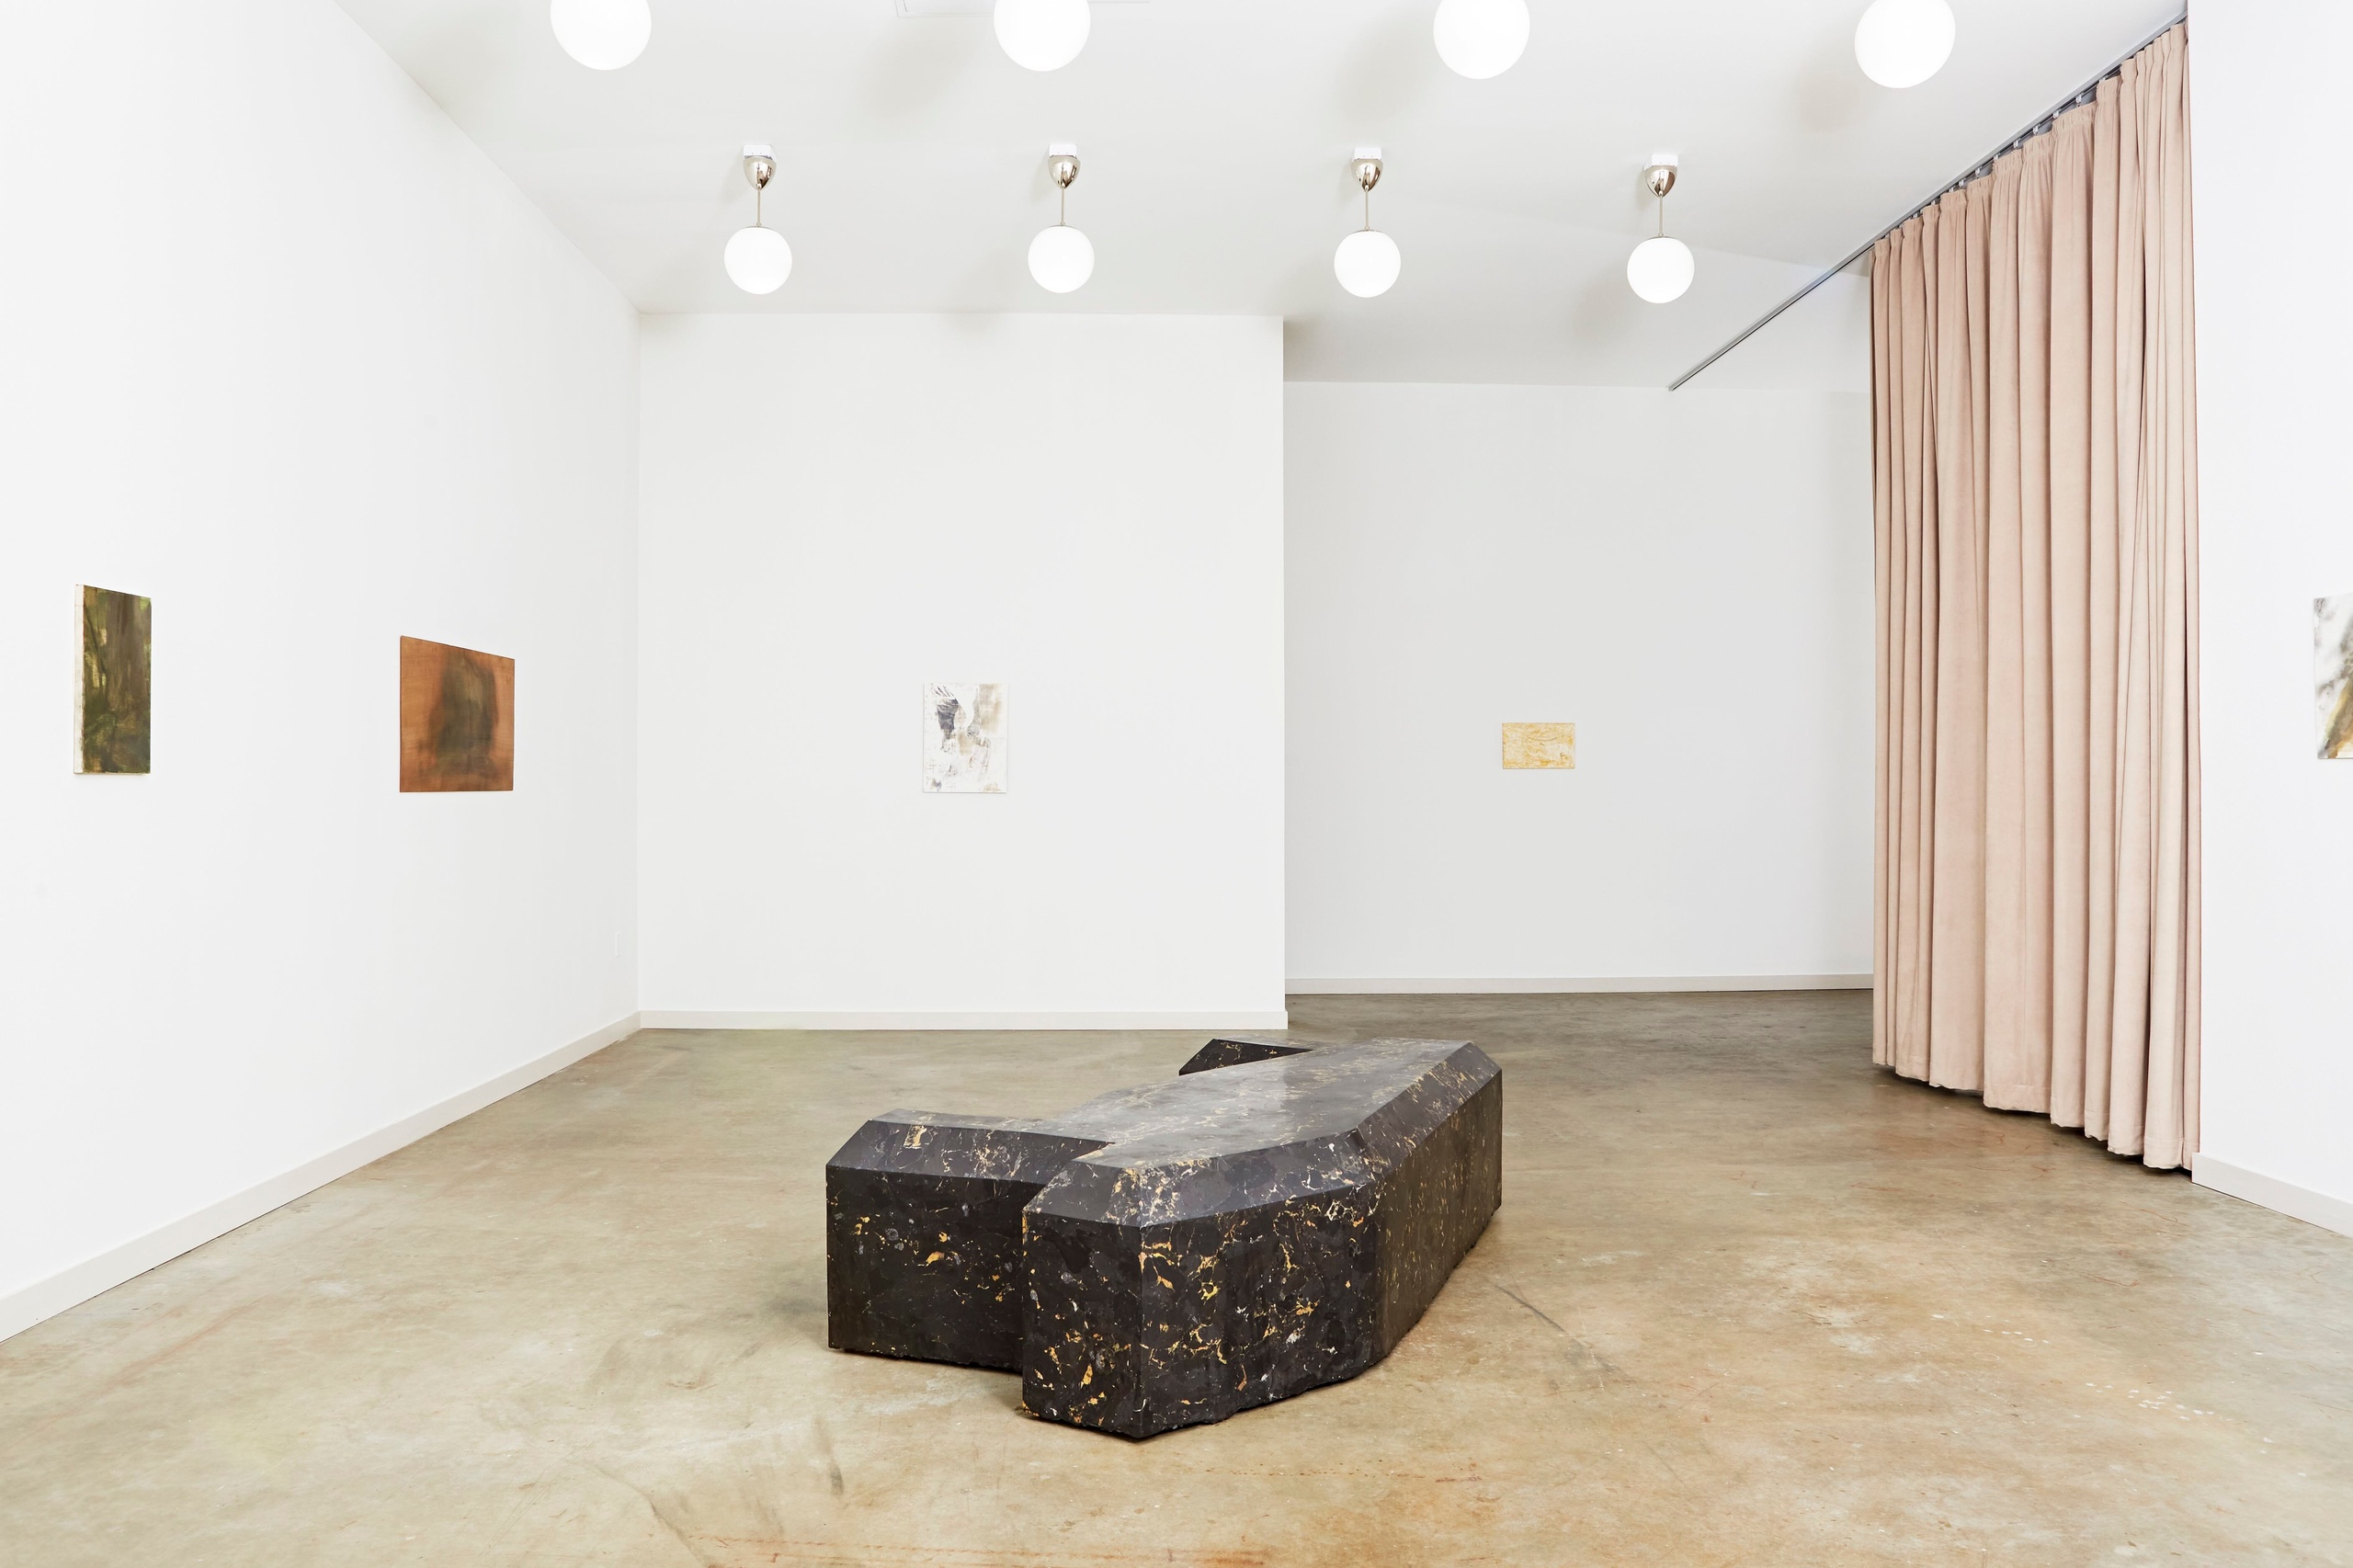 Installation view, Willow Staging Area, STARS, Los Angeles, 2021